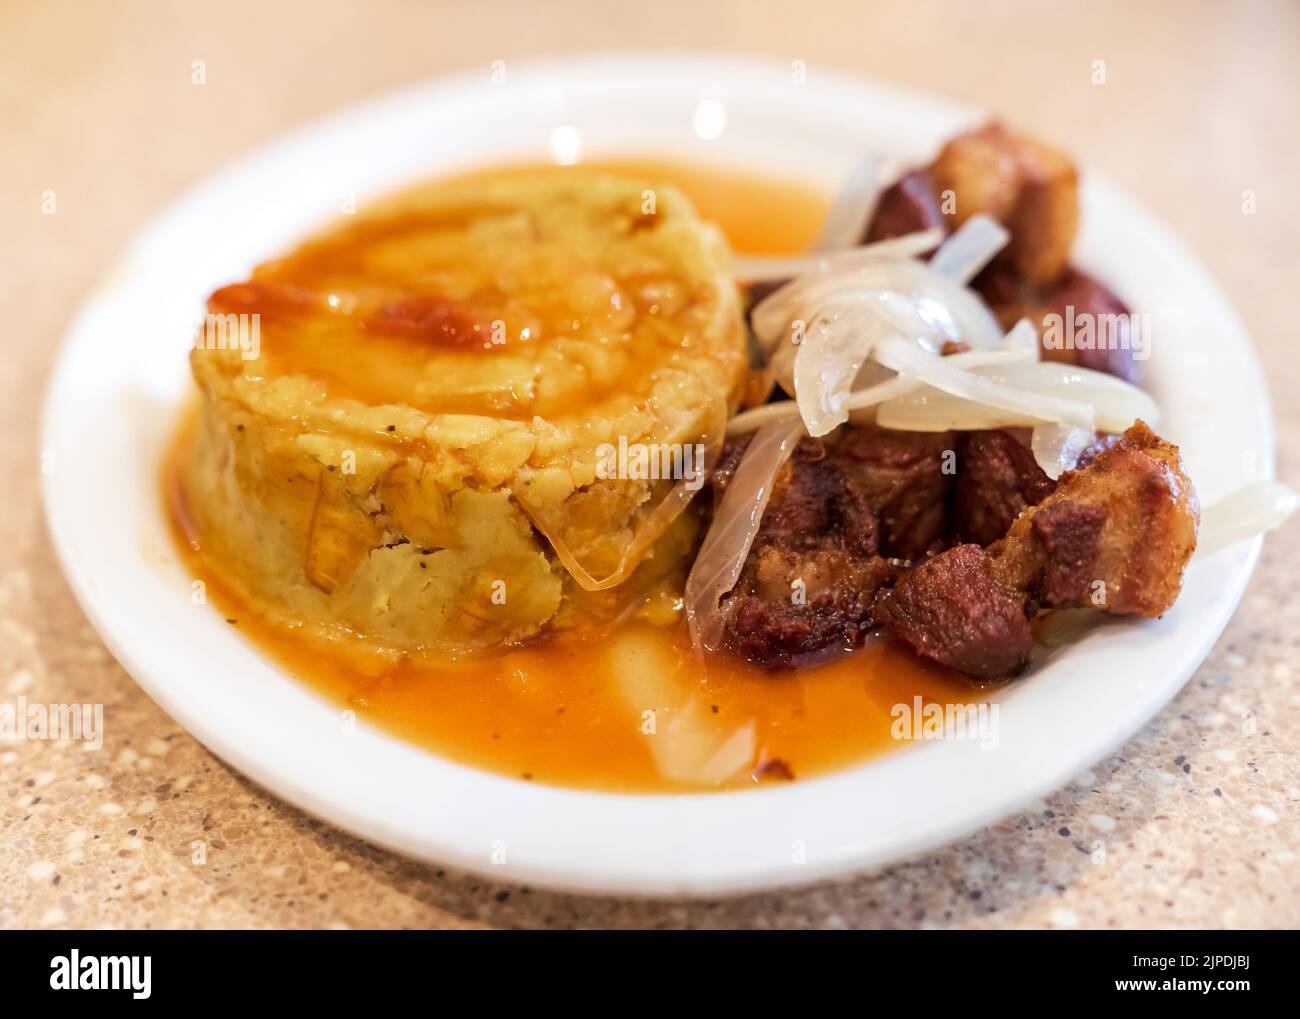 Delicious Puerto Rican Fried Pork Mofongo with Onions and Garlic Sauce. Stock Photo